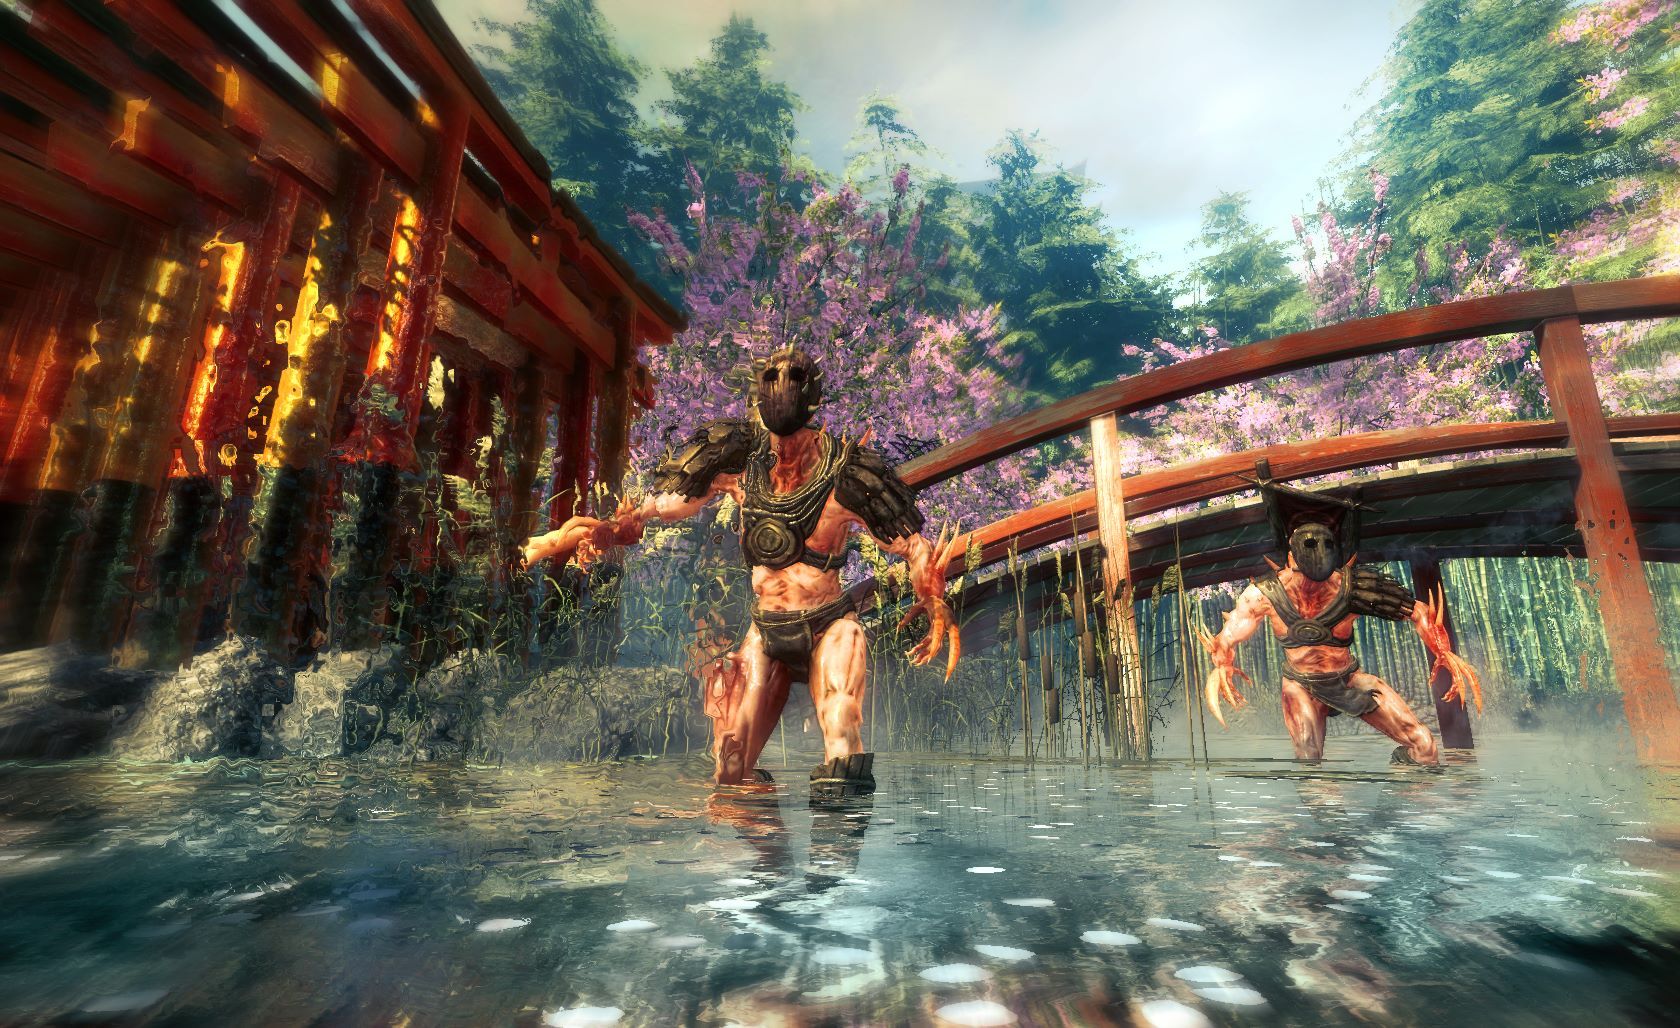 download shadow 2 warrior for free